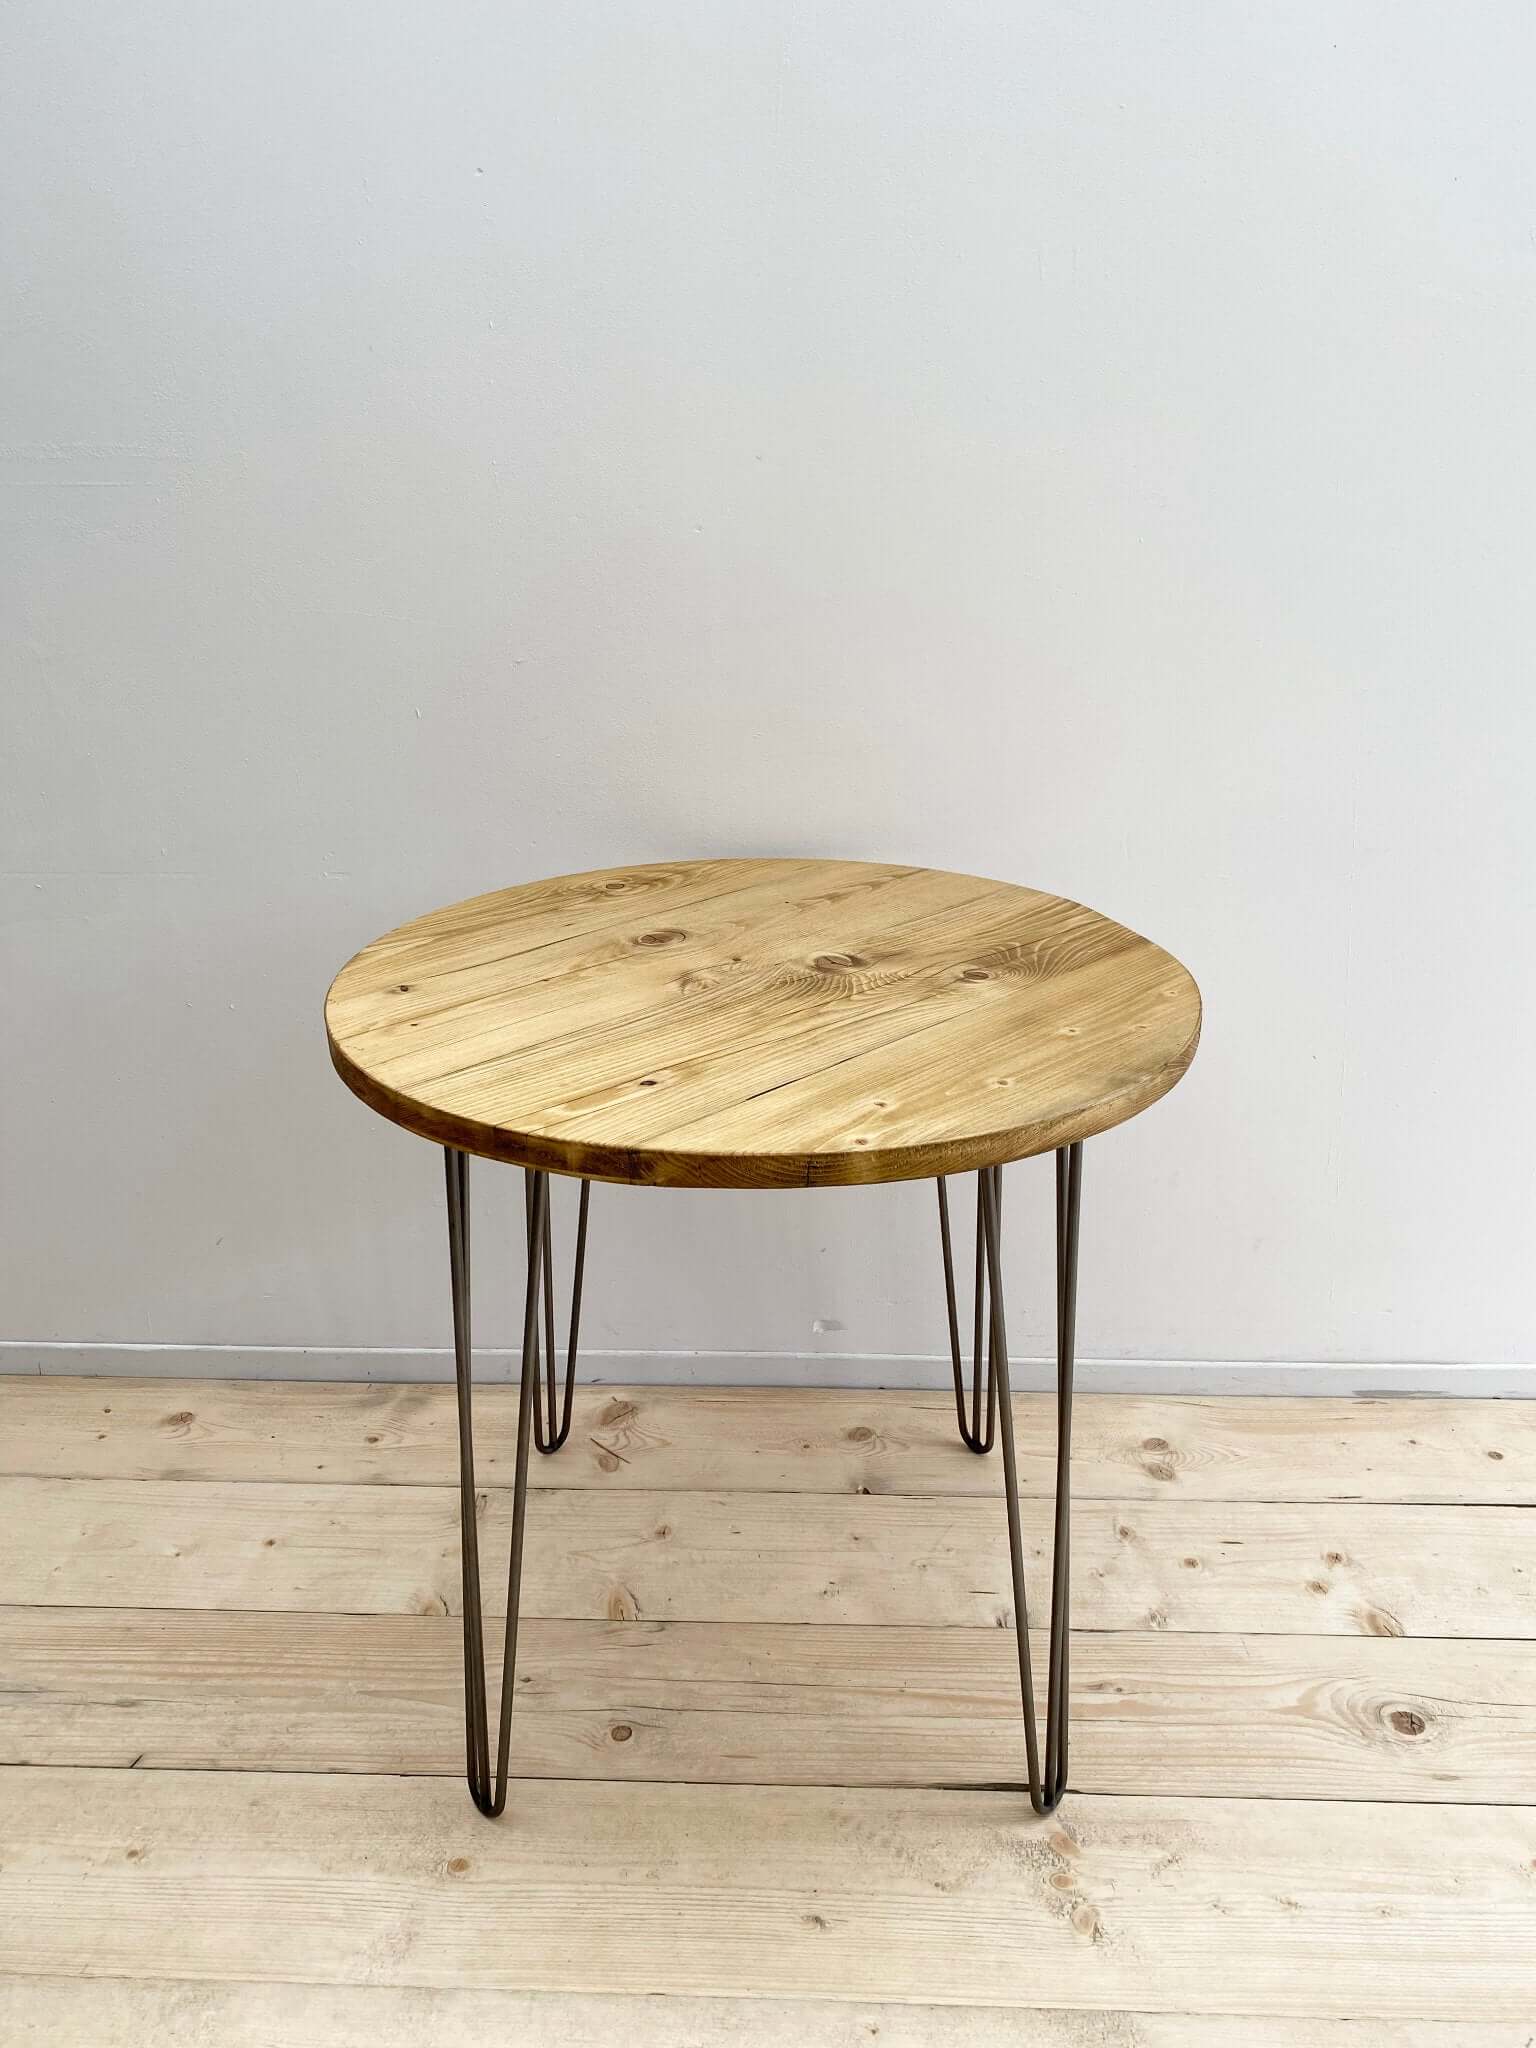 Reclaimed wood circle dining table with hairpin legs.